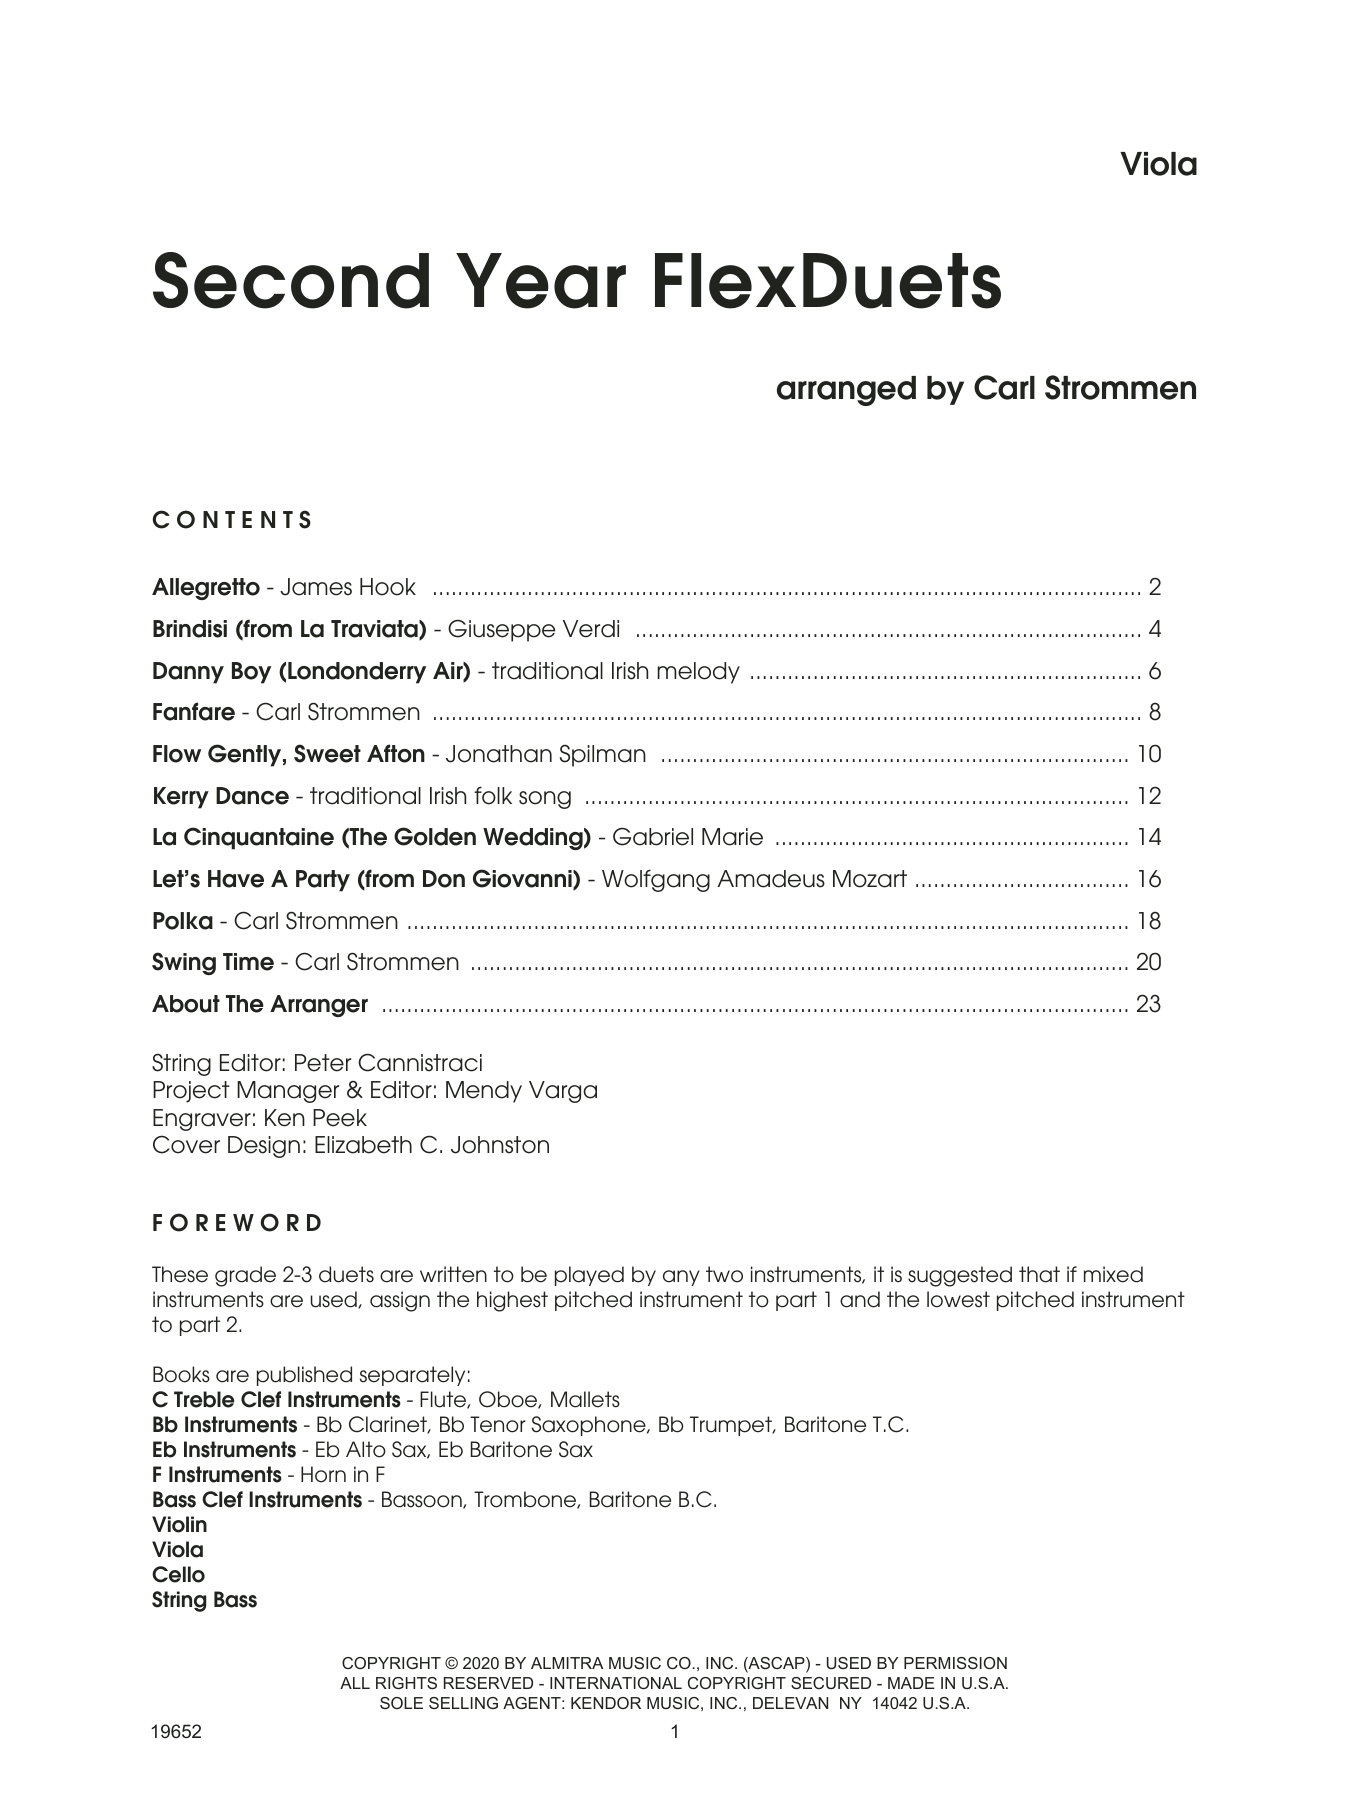 Download Carl Strommen Second Year FlexDuets - Viola sheet music and printable PDF score & Classical music notes